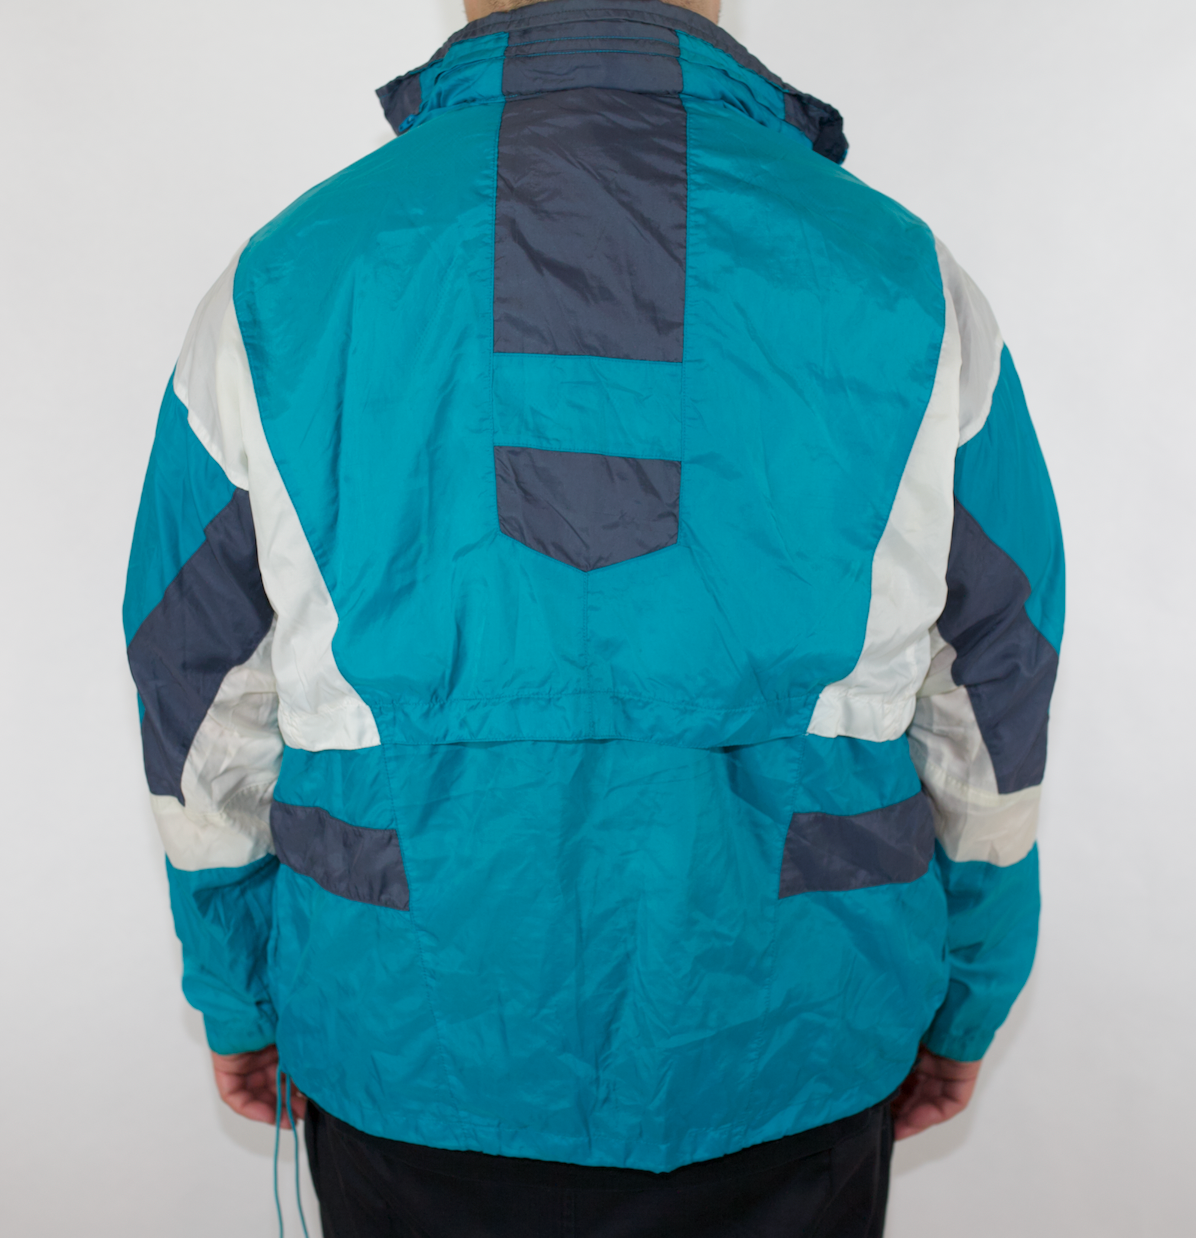 VINTAGE NIKE TEAL WHITE GREY SPRAY JACKET (TAGGED FADED FITS M-L)